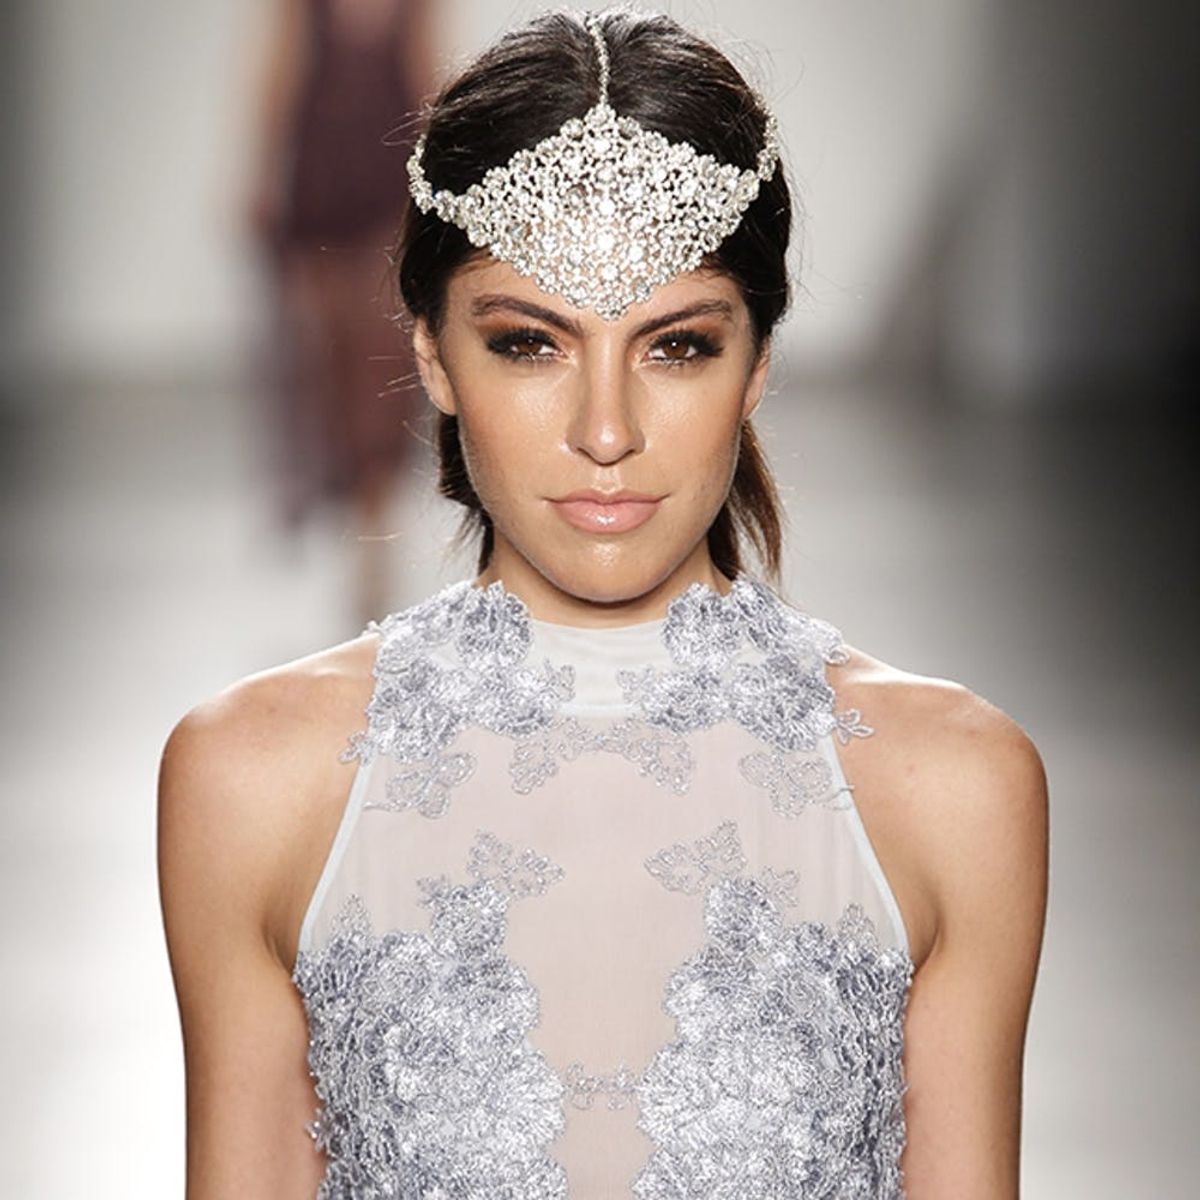 24 Runway-Inspired Hair, Makeup + Style Looks for Every Bride